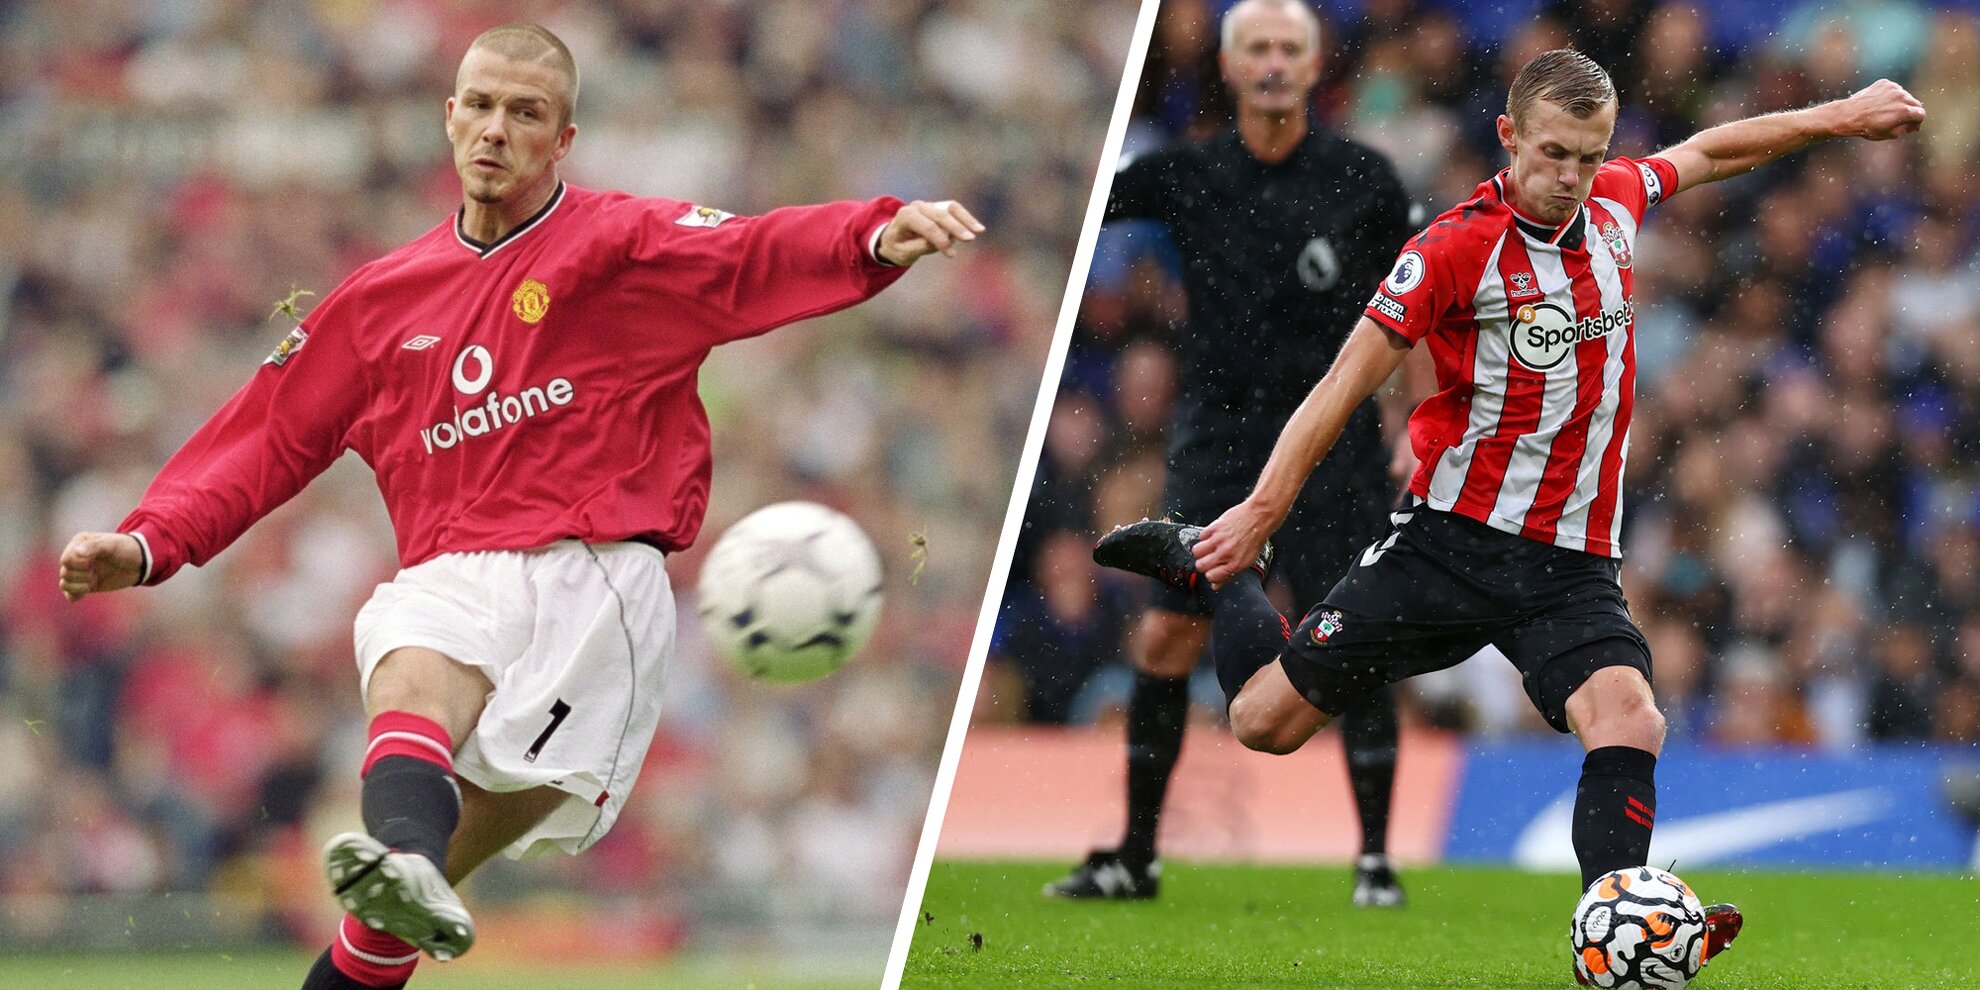 Top five players with most free kick goals in Premier League History